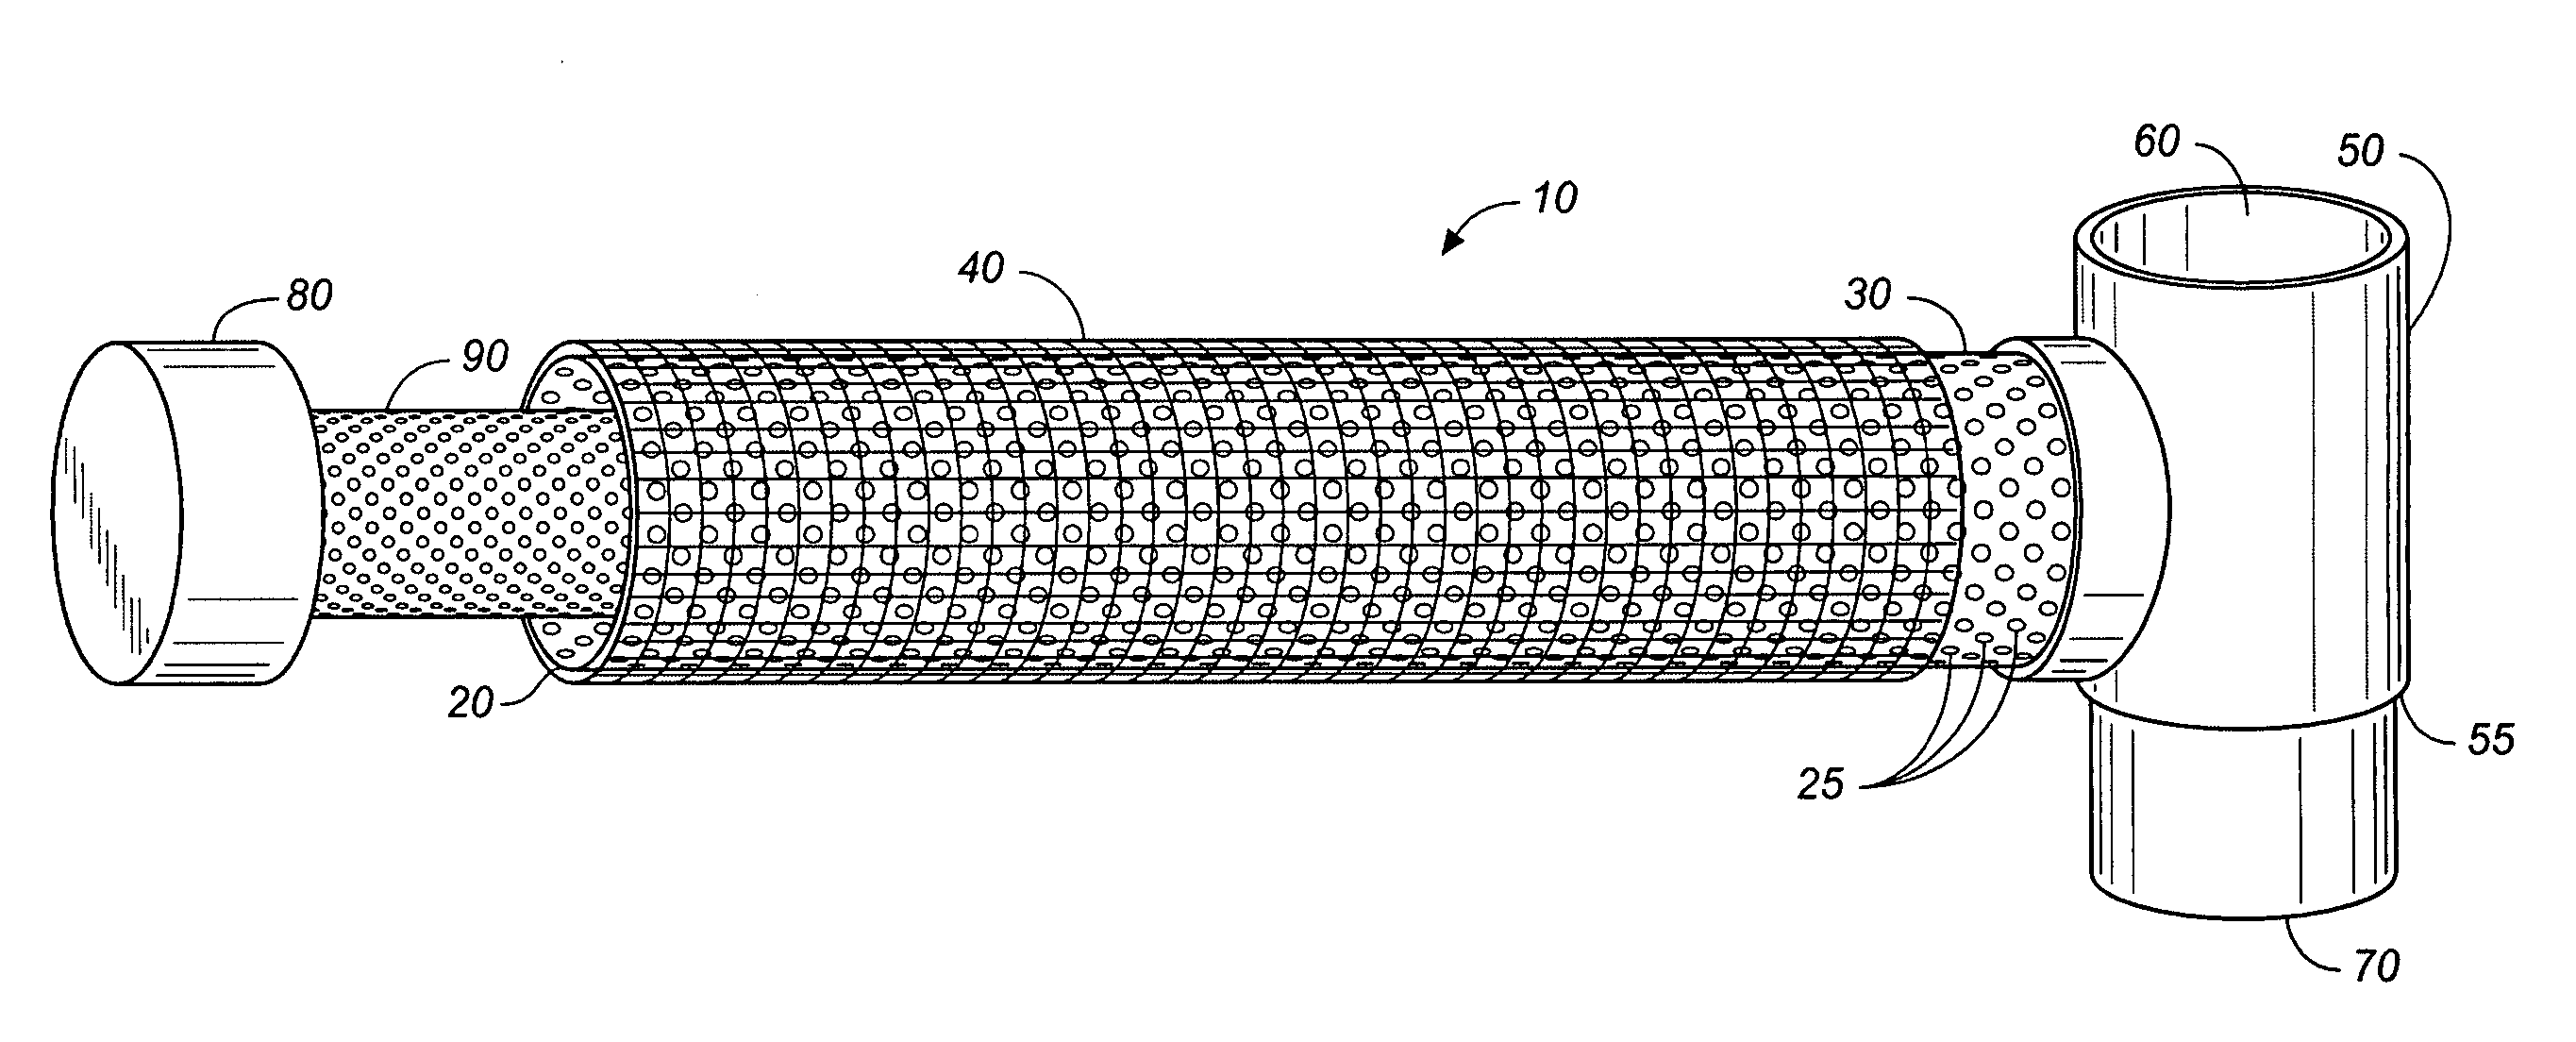 Trench drain filter assembly